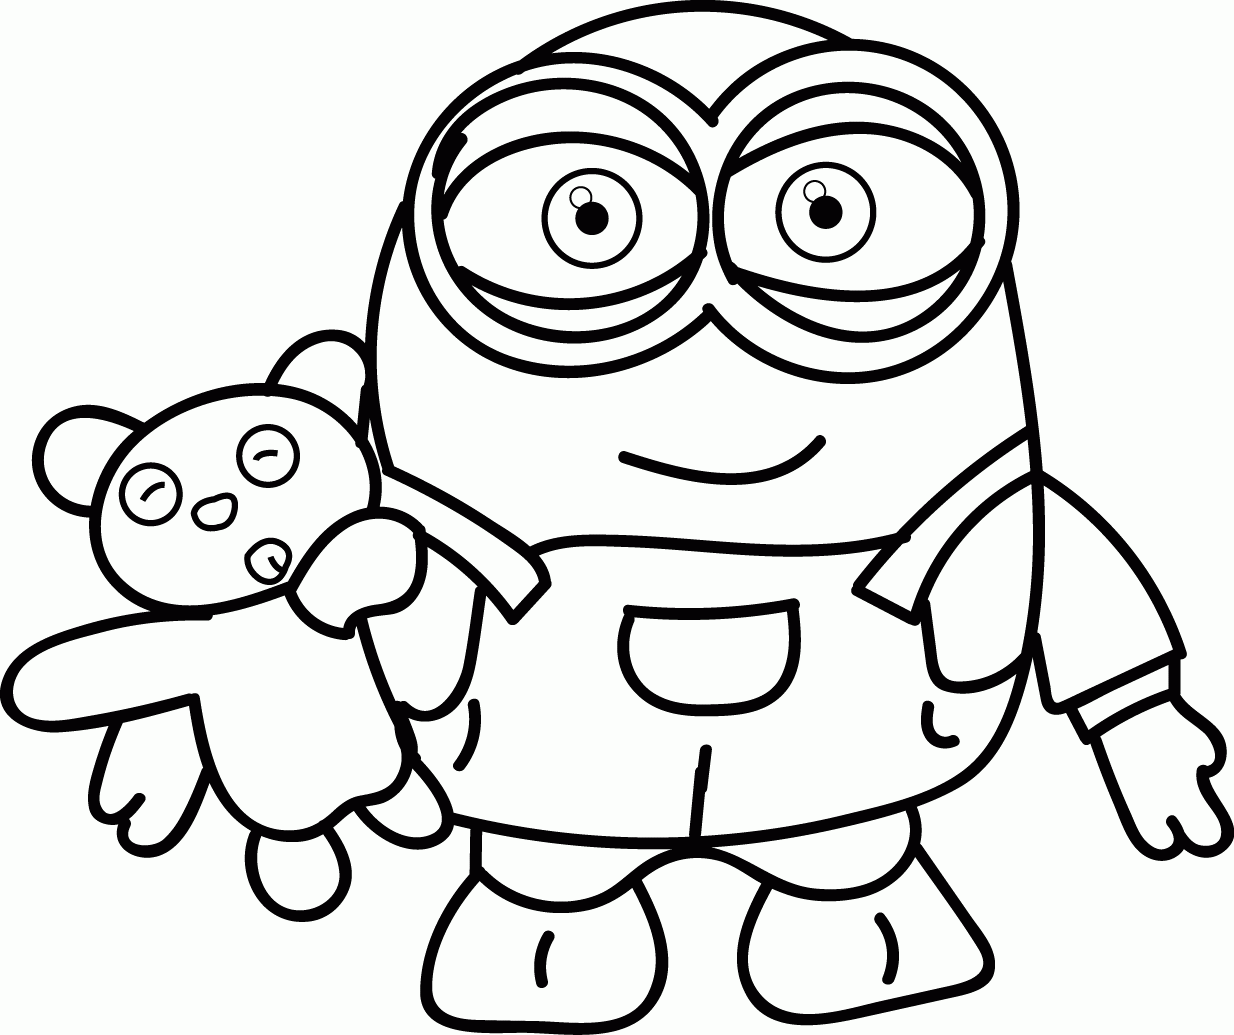 Minions Toy At Hand Coloring Page | 